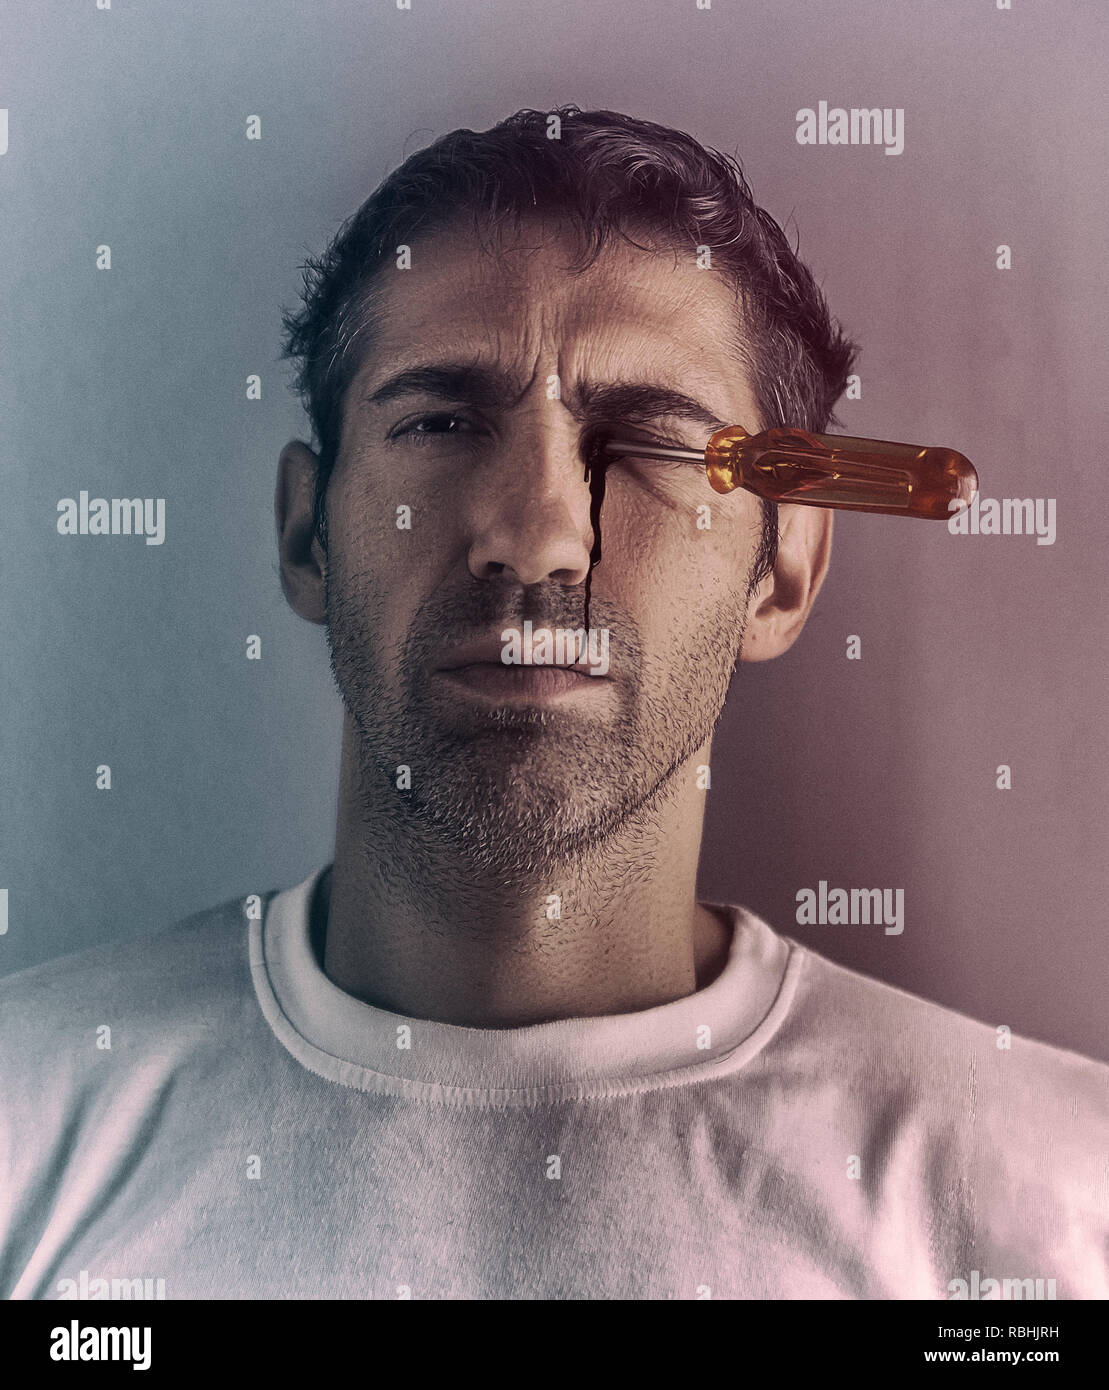 A man looking at the camera while the blood slips from his eye due to a screwdriver. Stock Photo